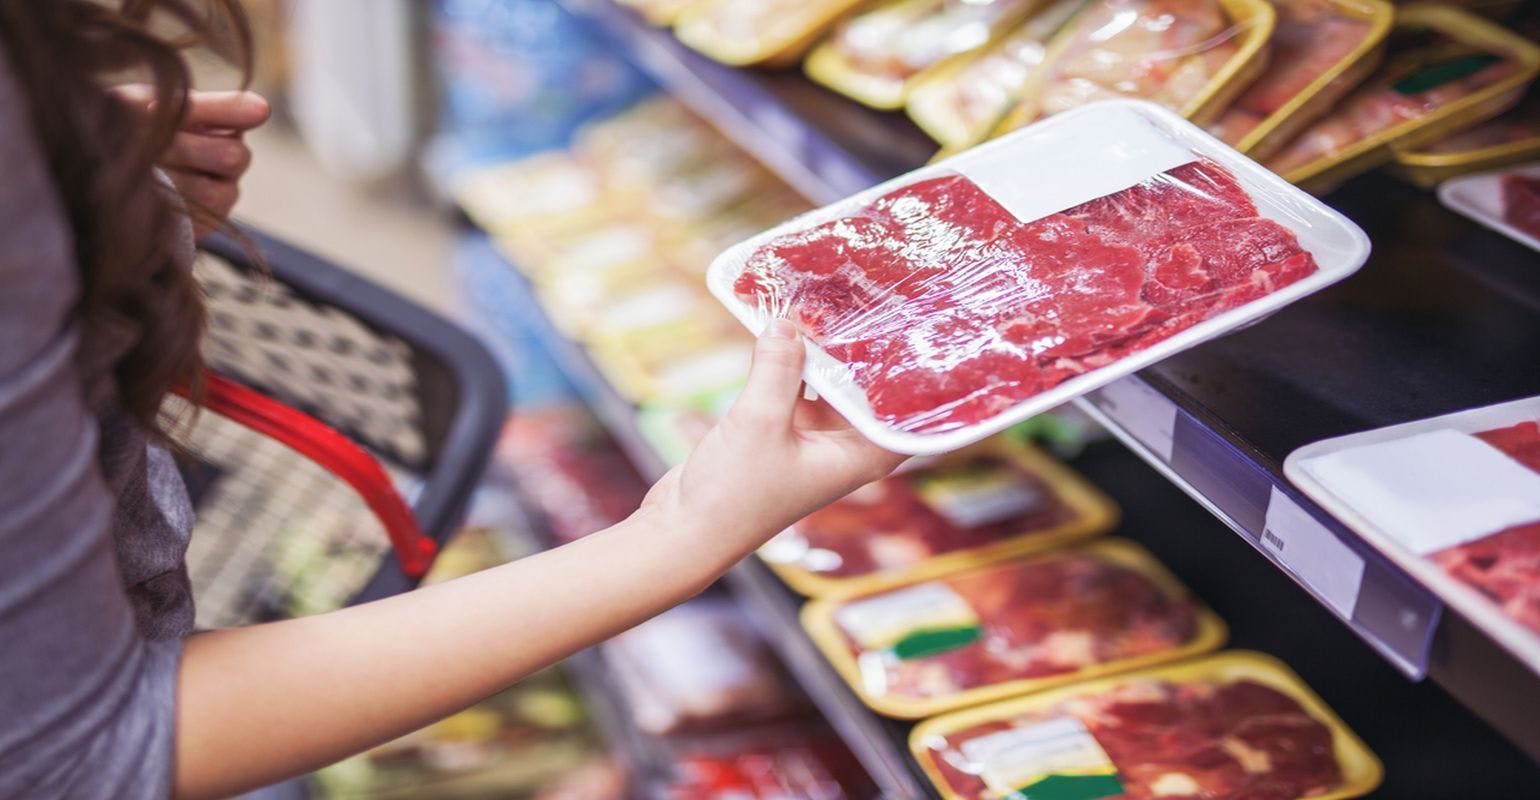 FDA Researchers Report First Evidence of ESBL-Producing E. coli in U.S. Retail Meat